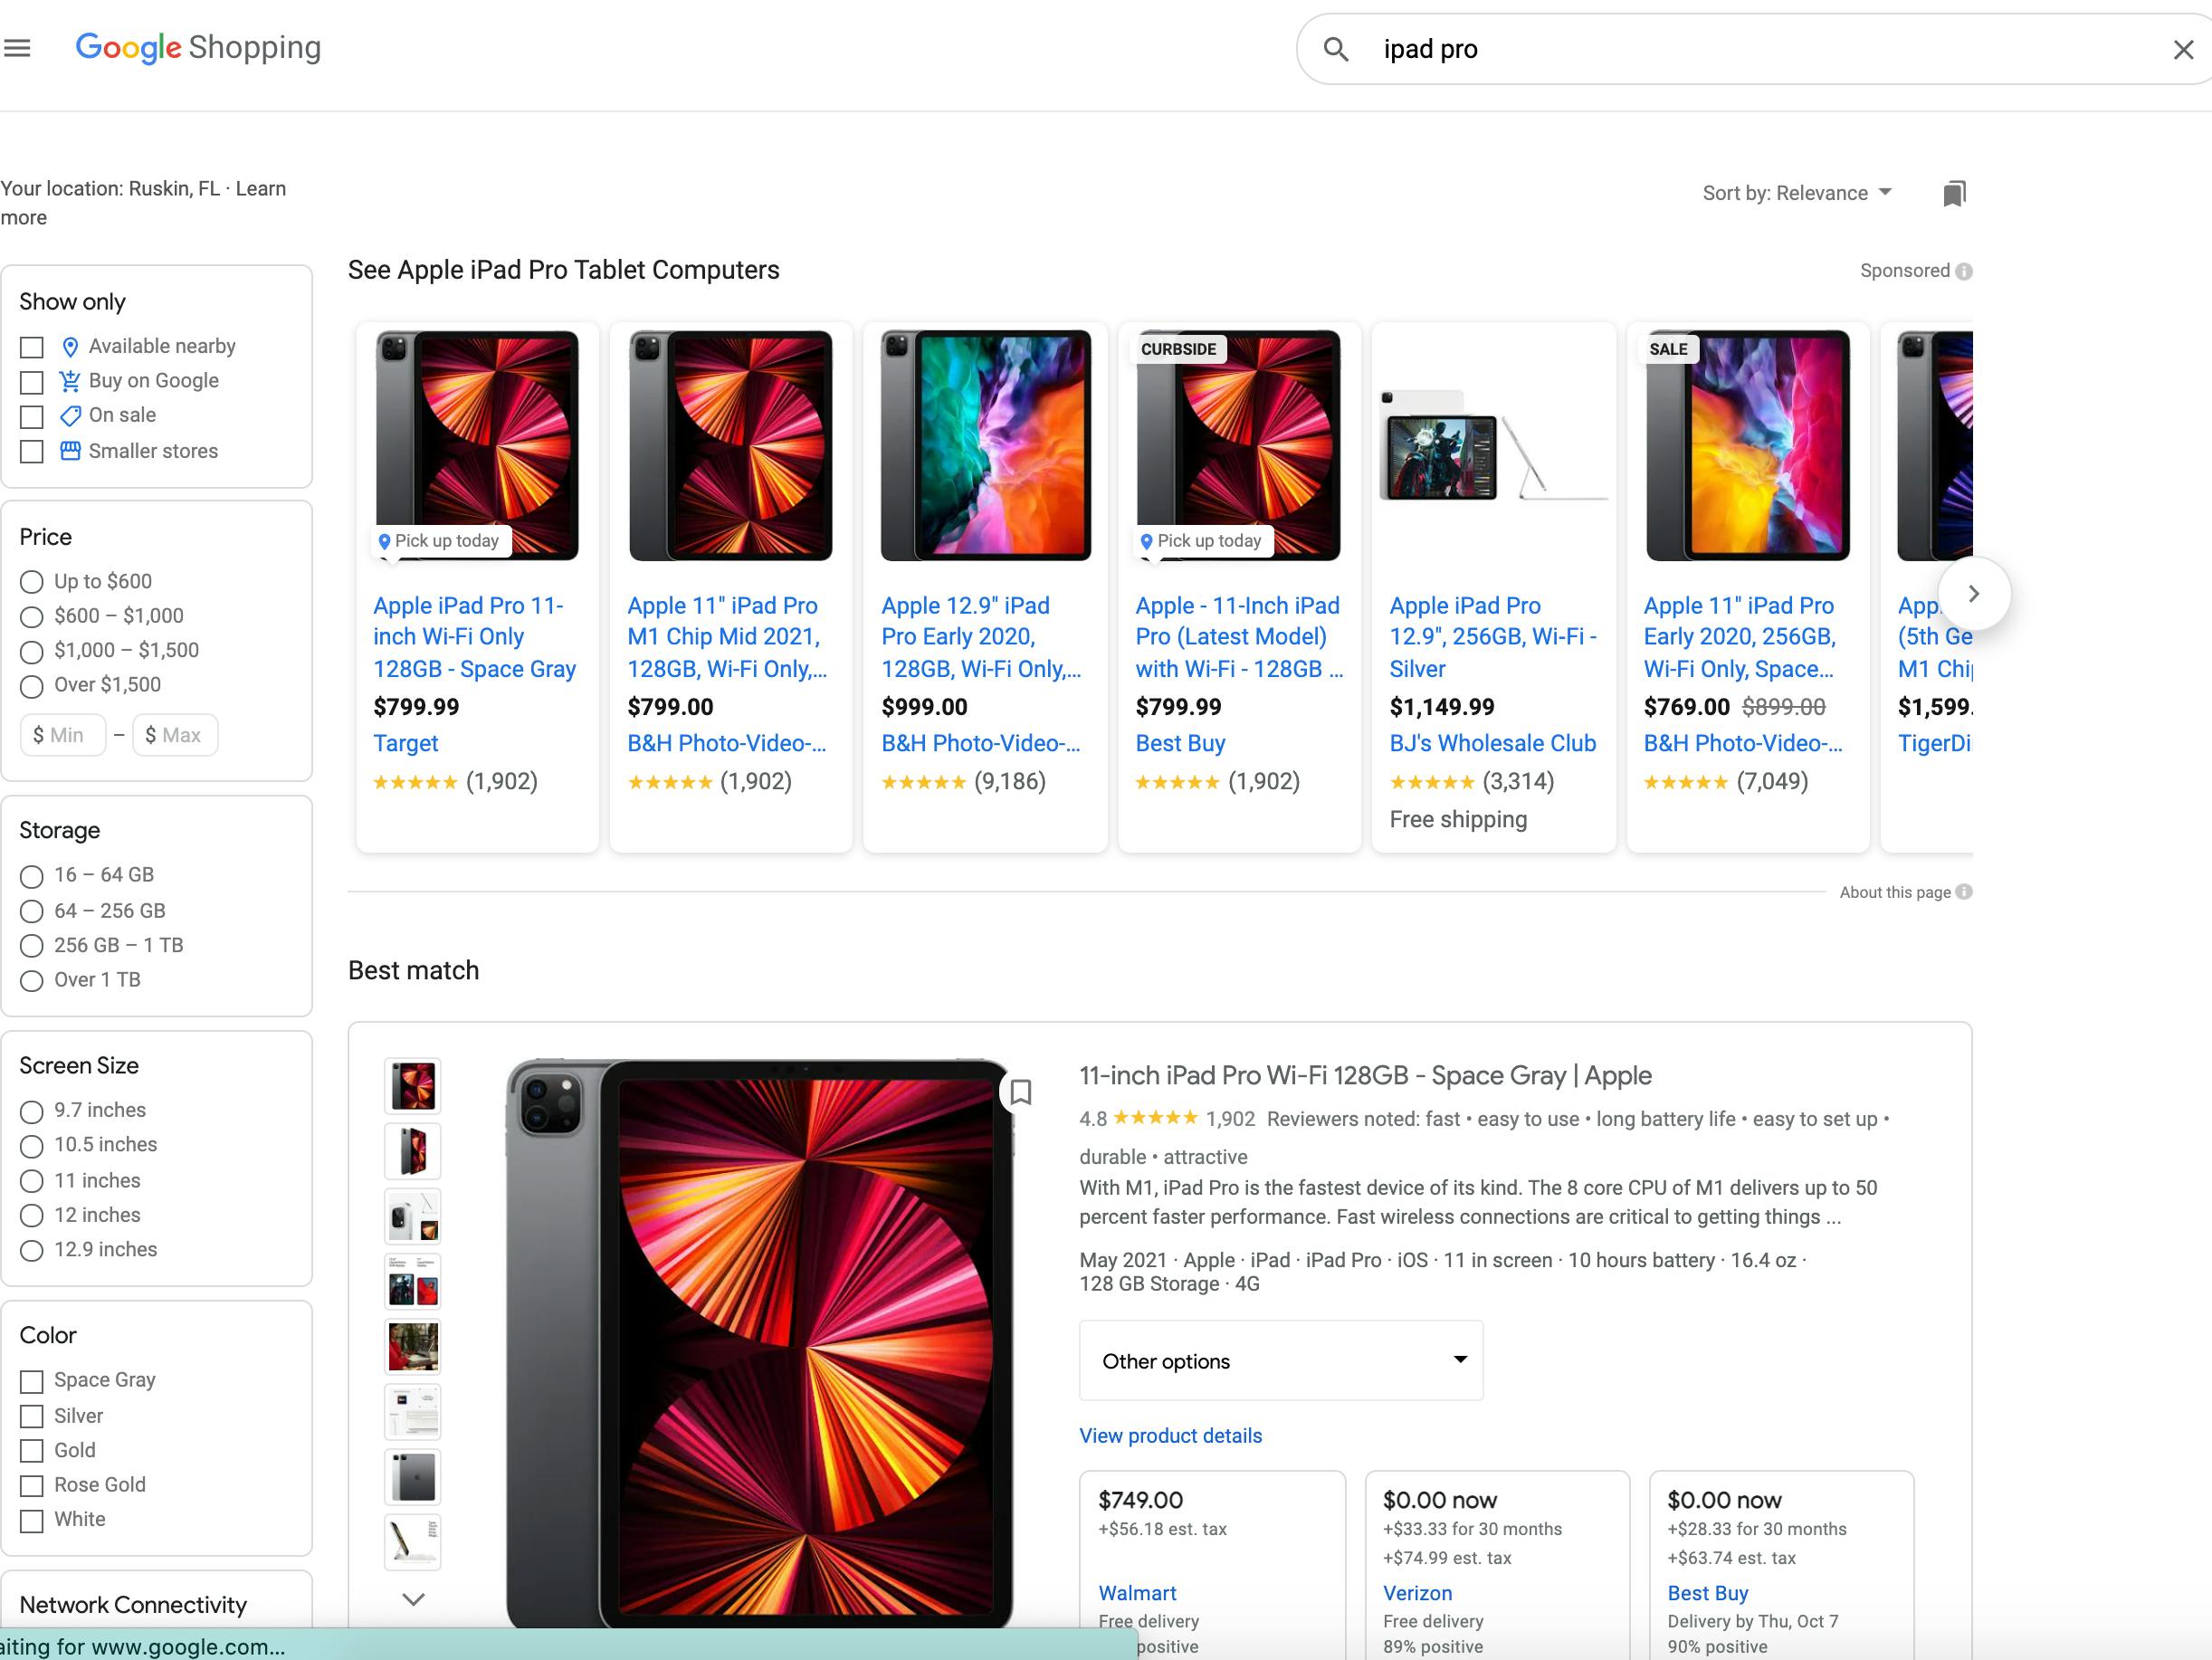 A screenshot of iPad Pro search results on Google Shopping